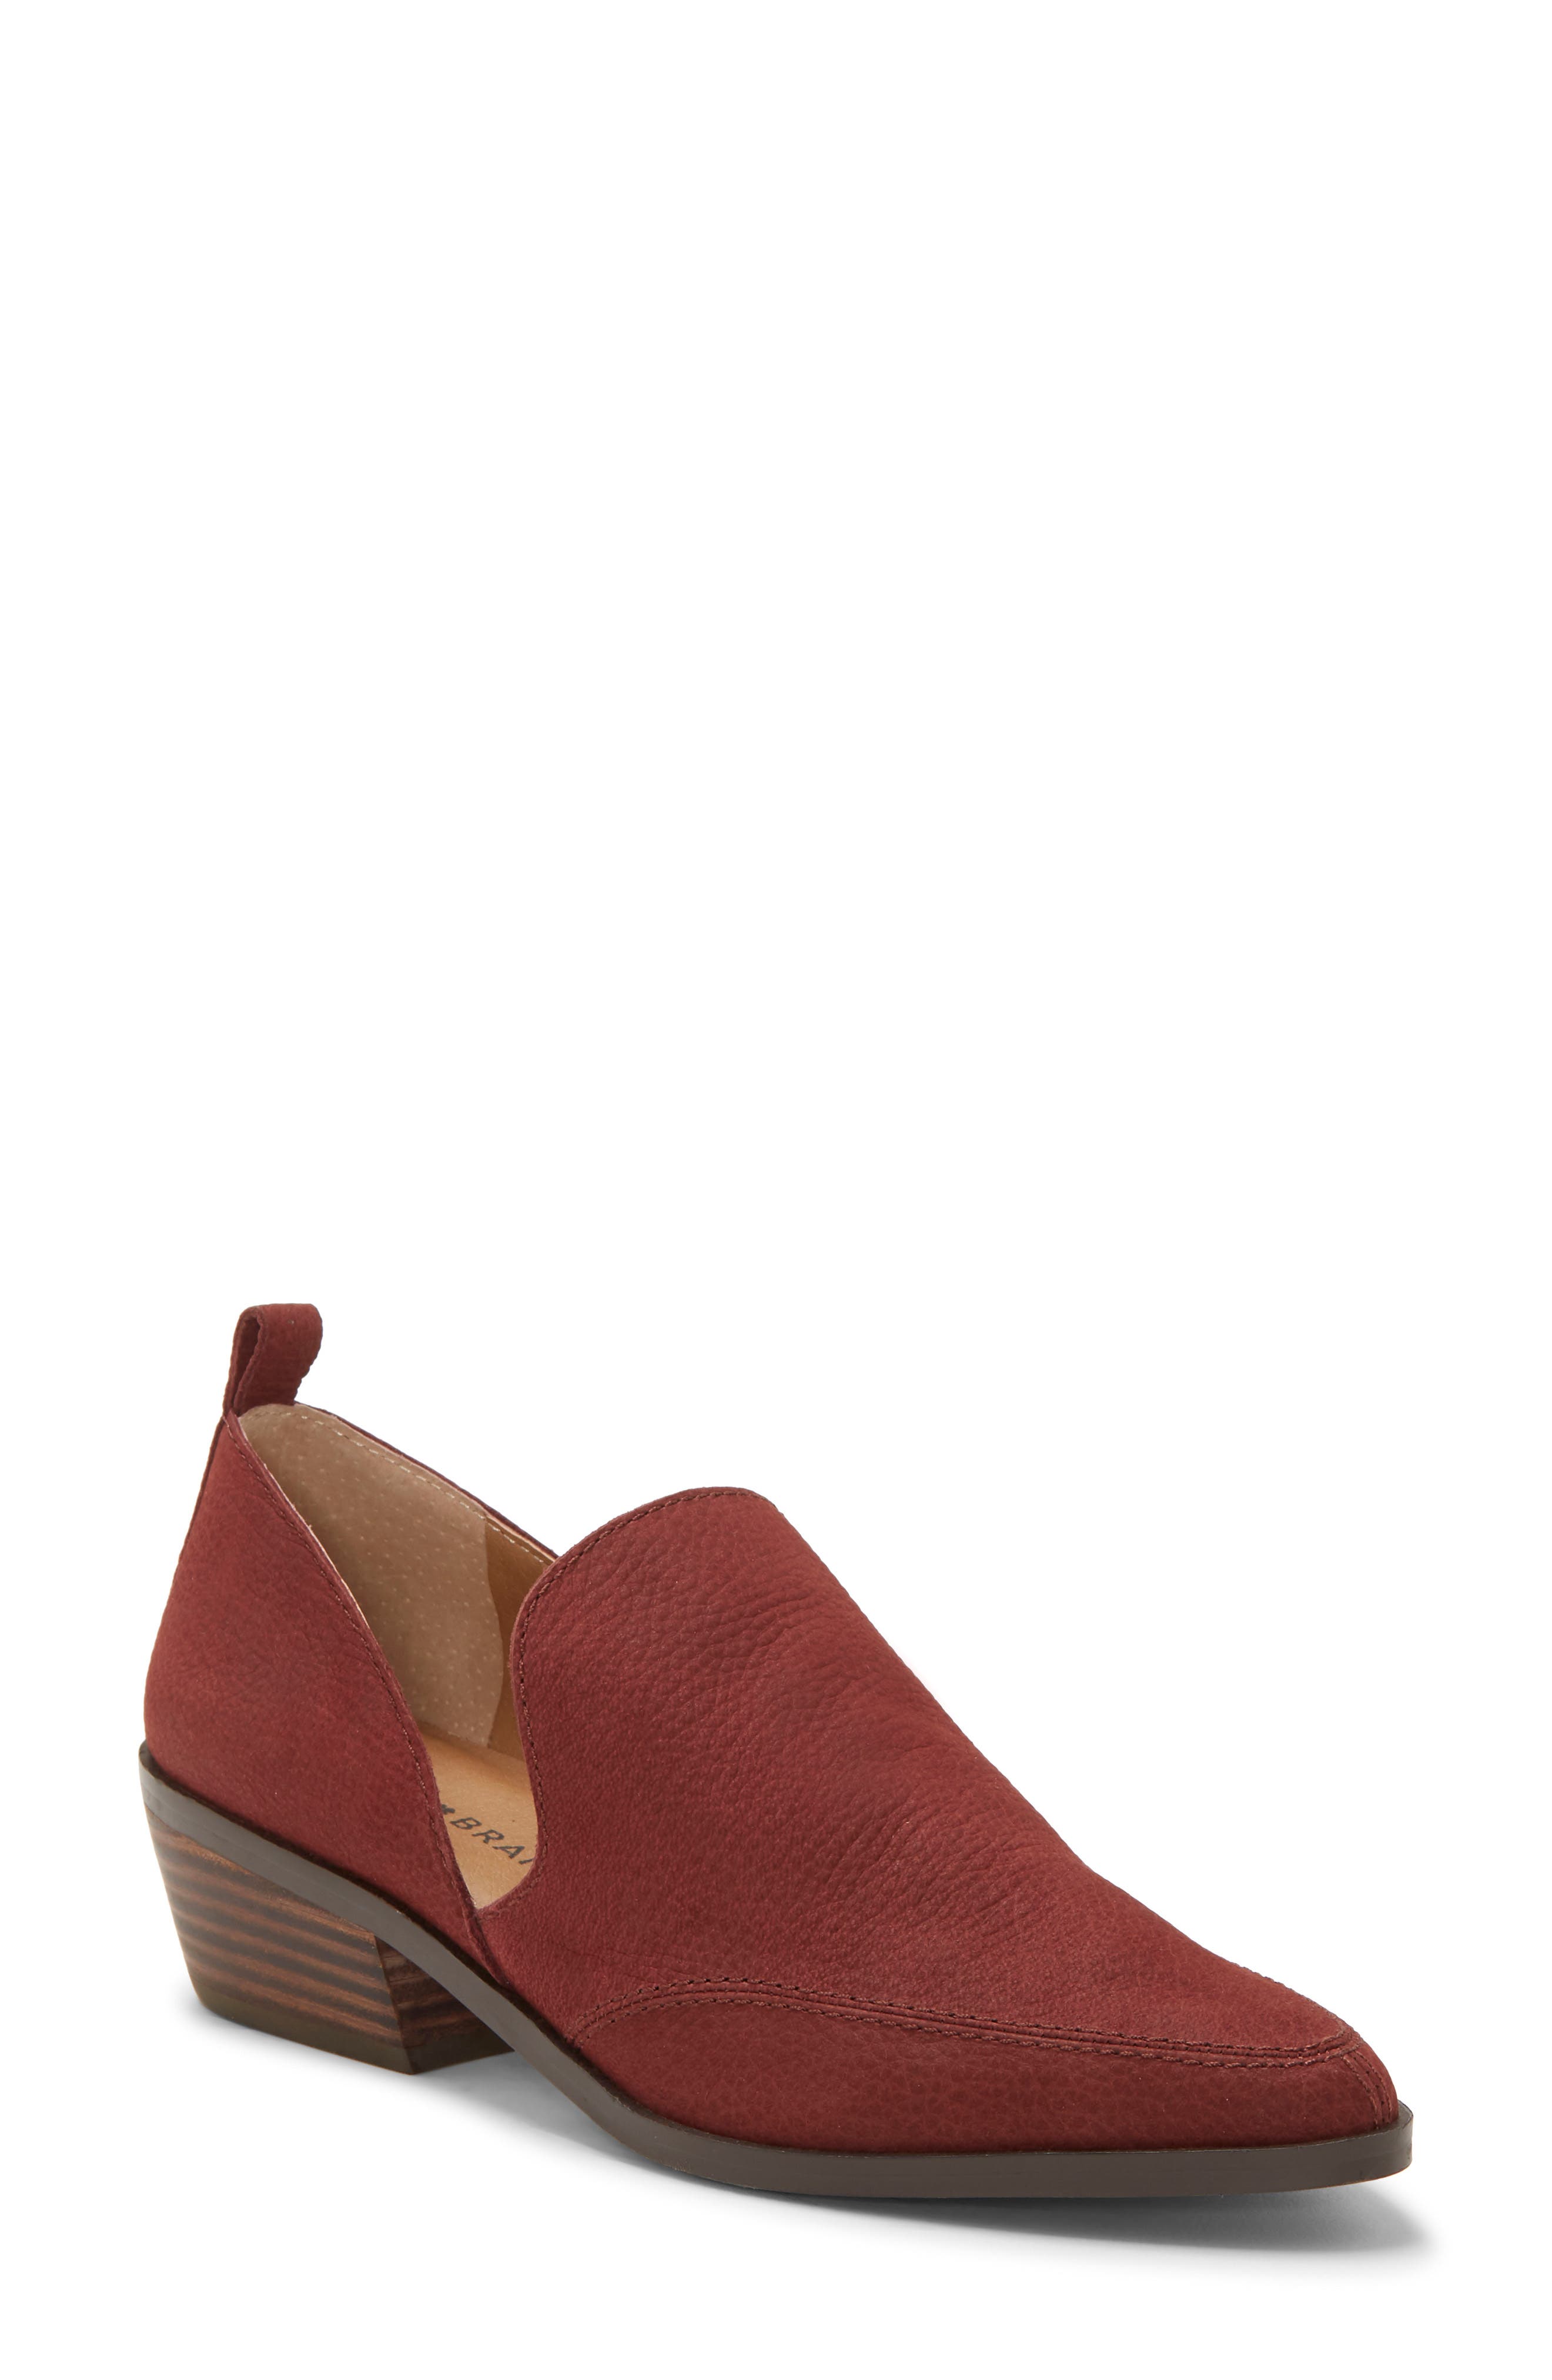 UPC 191644545627 product image for Women's Lucky Brand Mahzan Bootie, Size 6 M - Red | upcitemdb.com